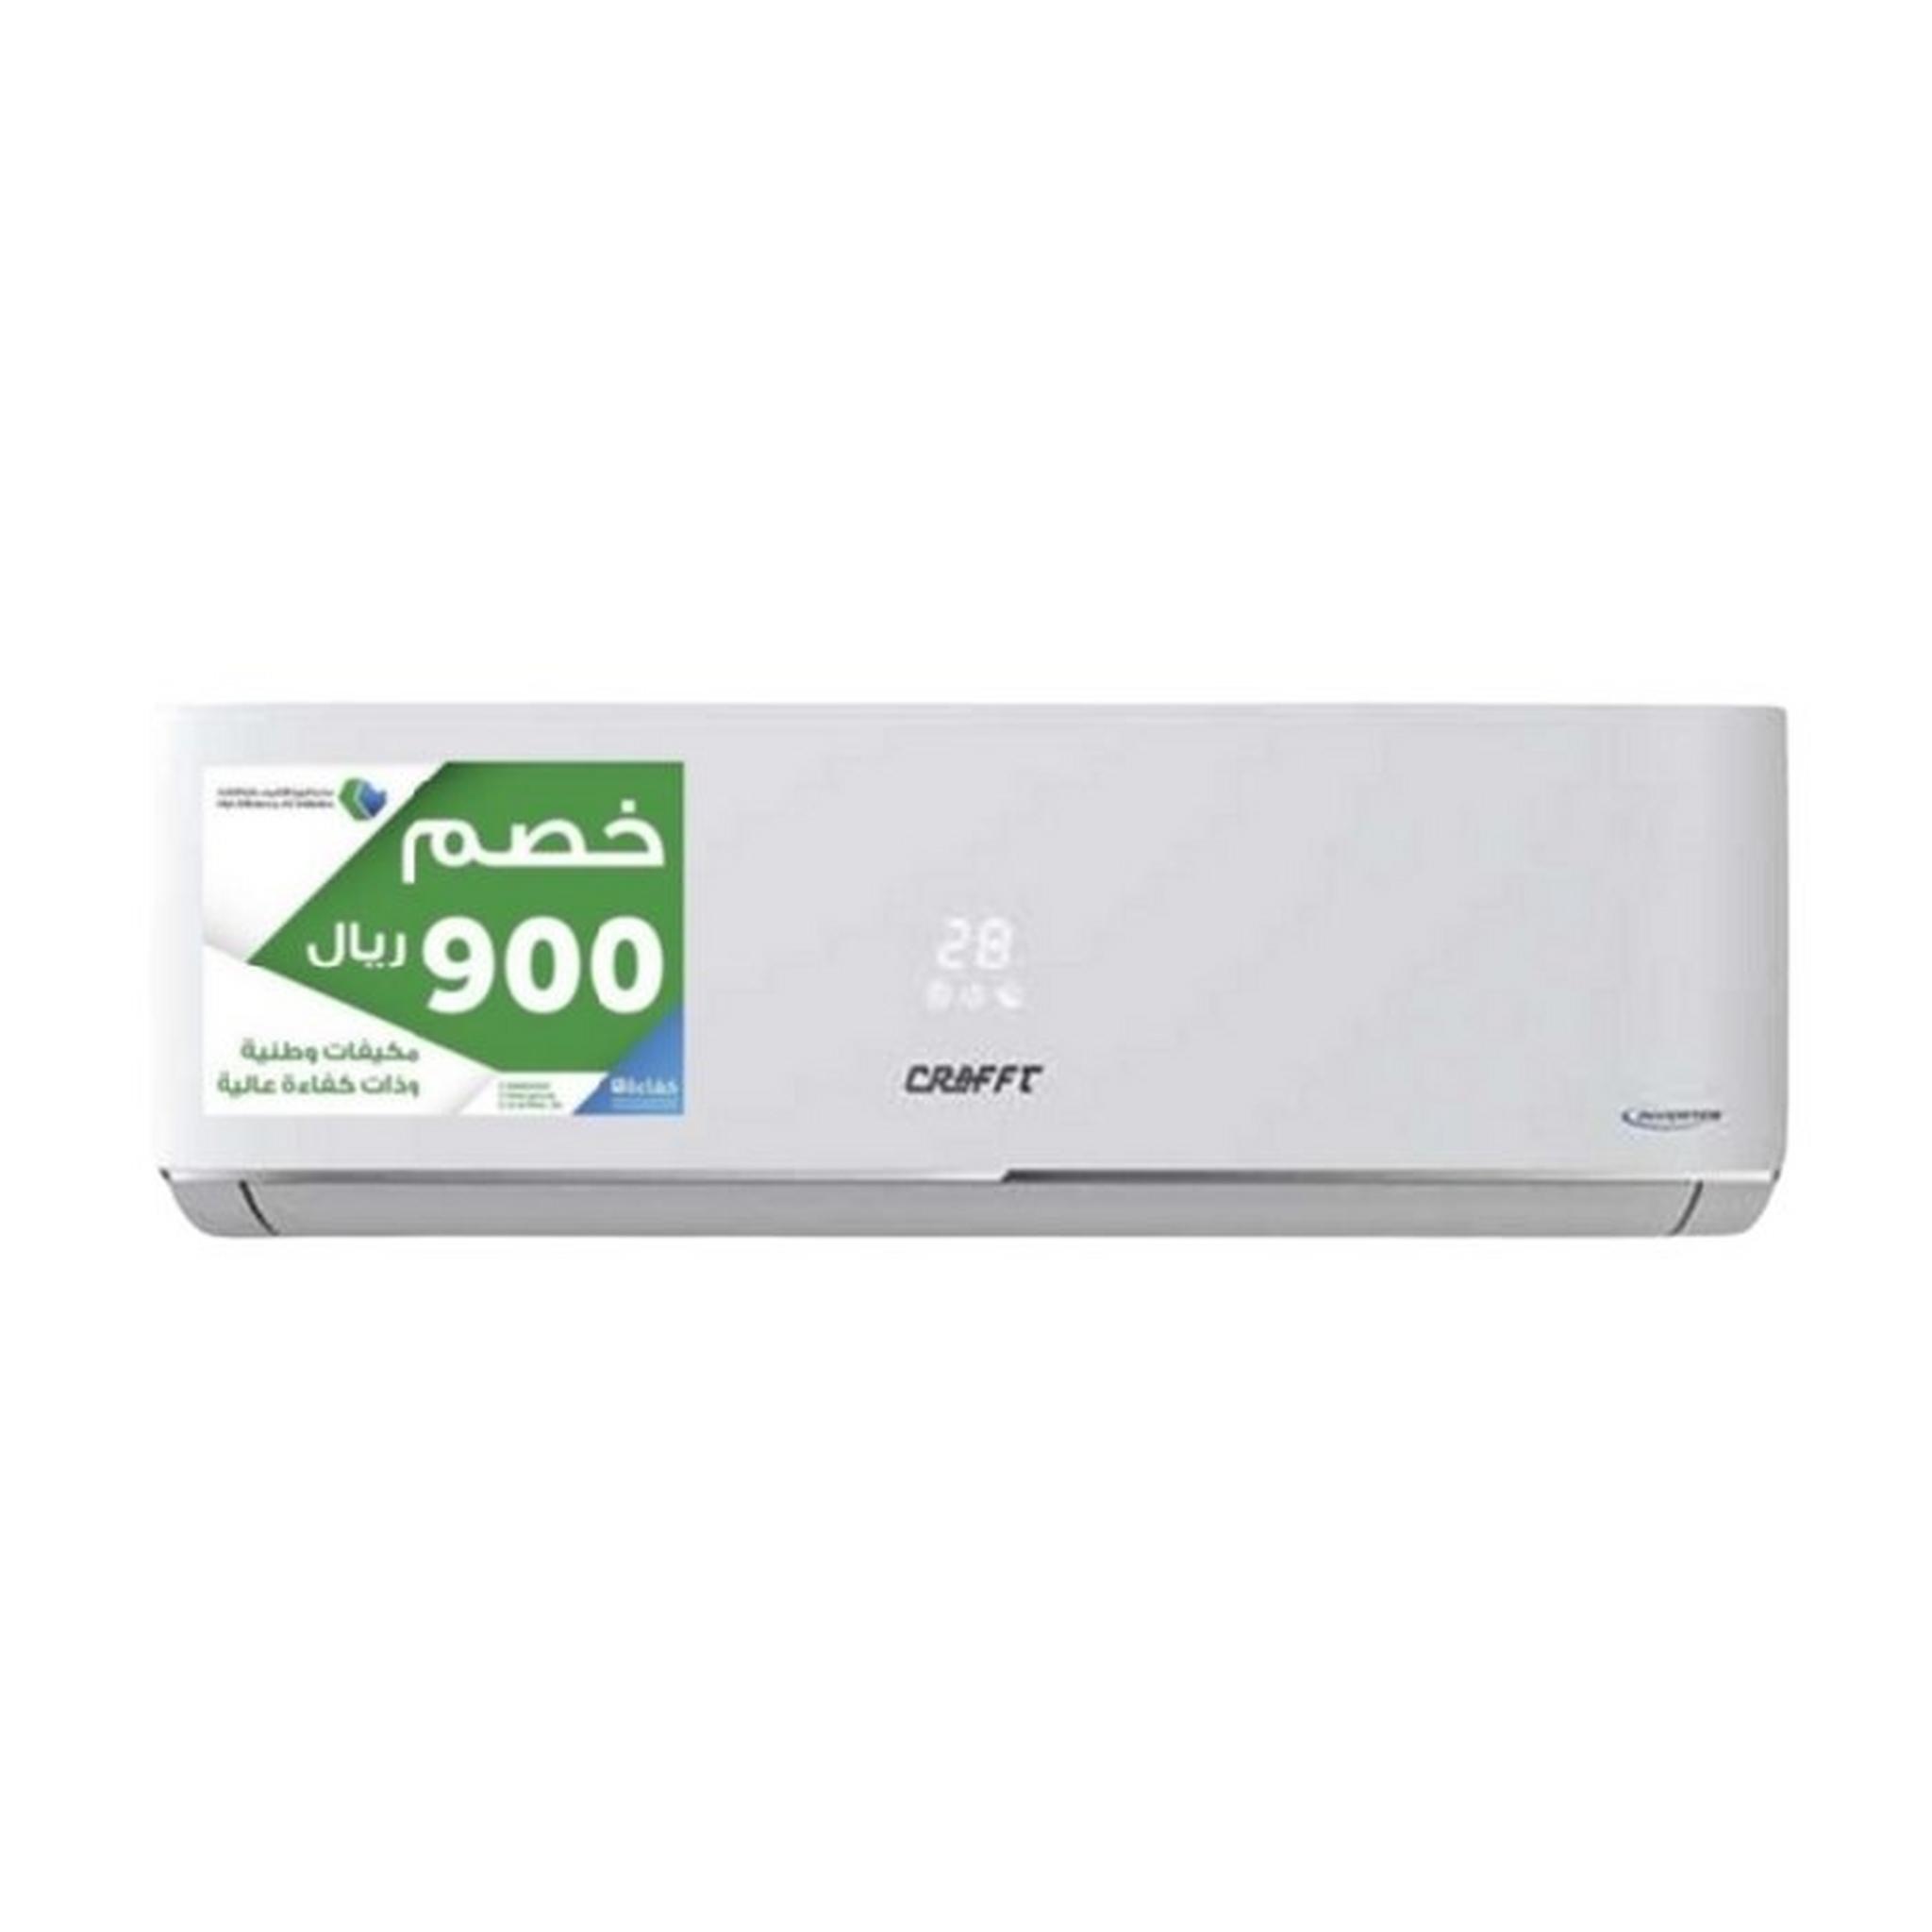 Craft  from High Efficiency Initiative Air Conditioner 18000 BTU cooling only Split AC (DS120FE6IN)